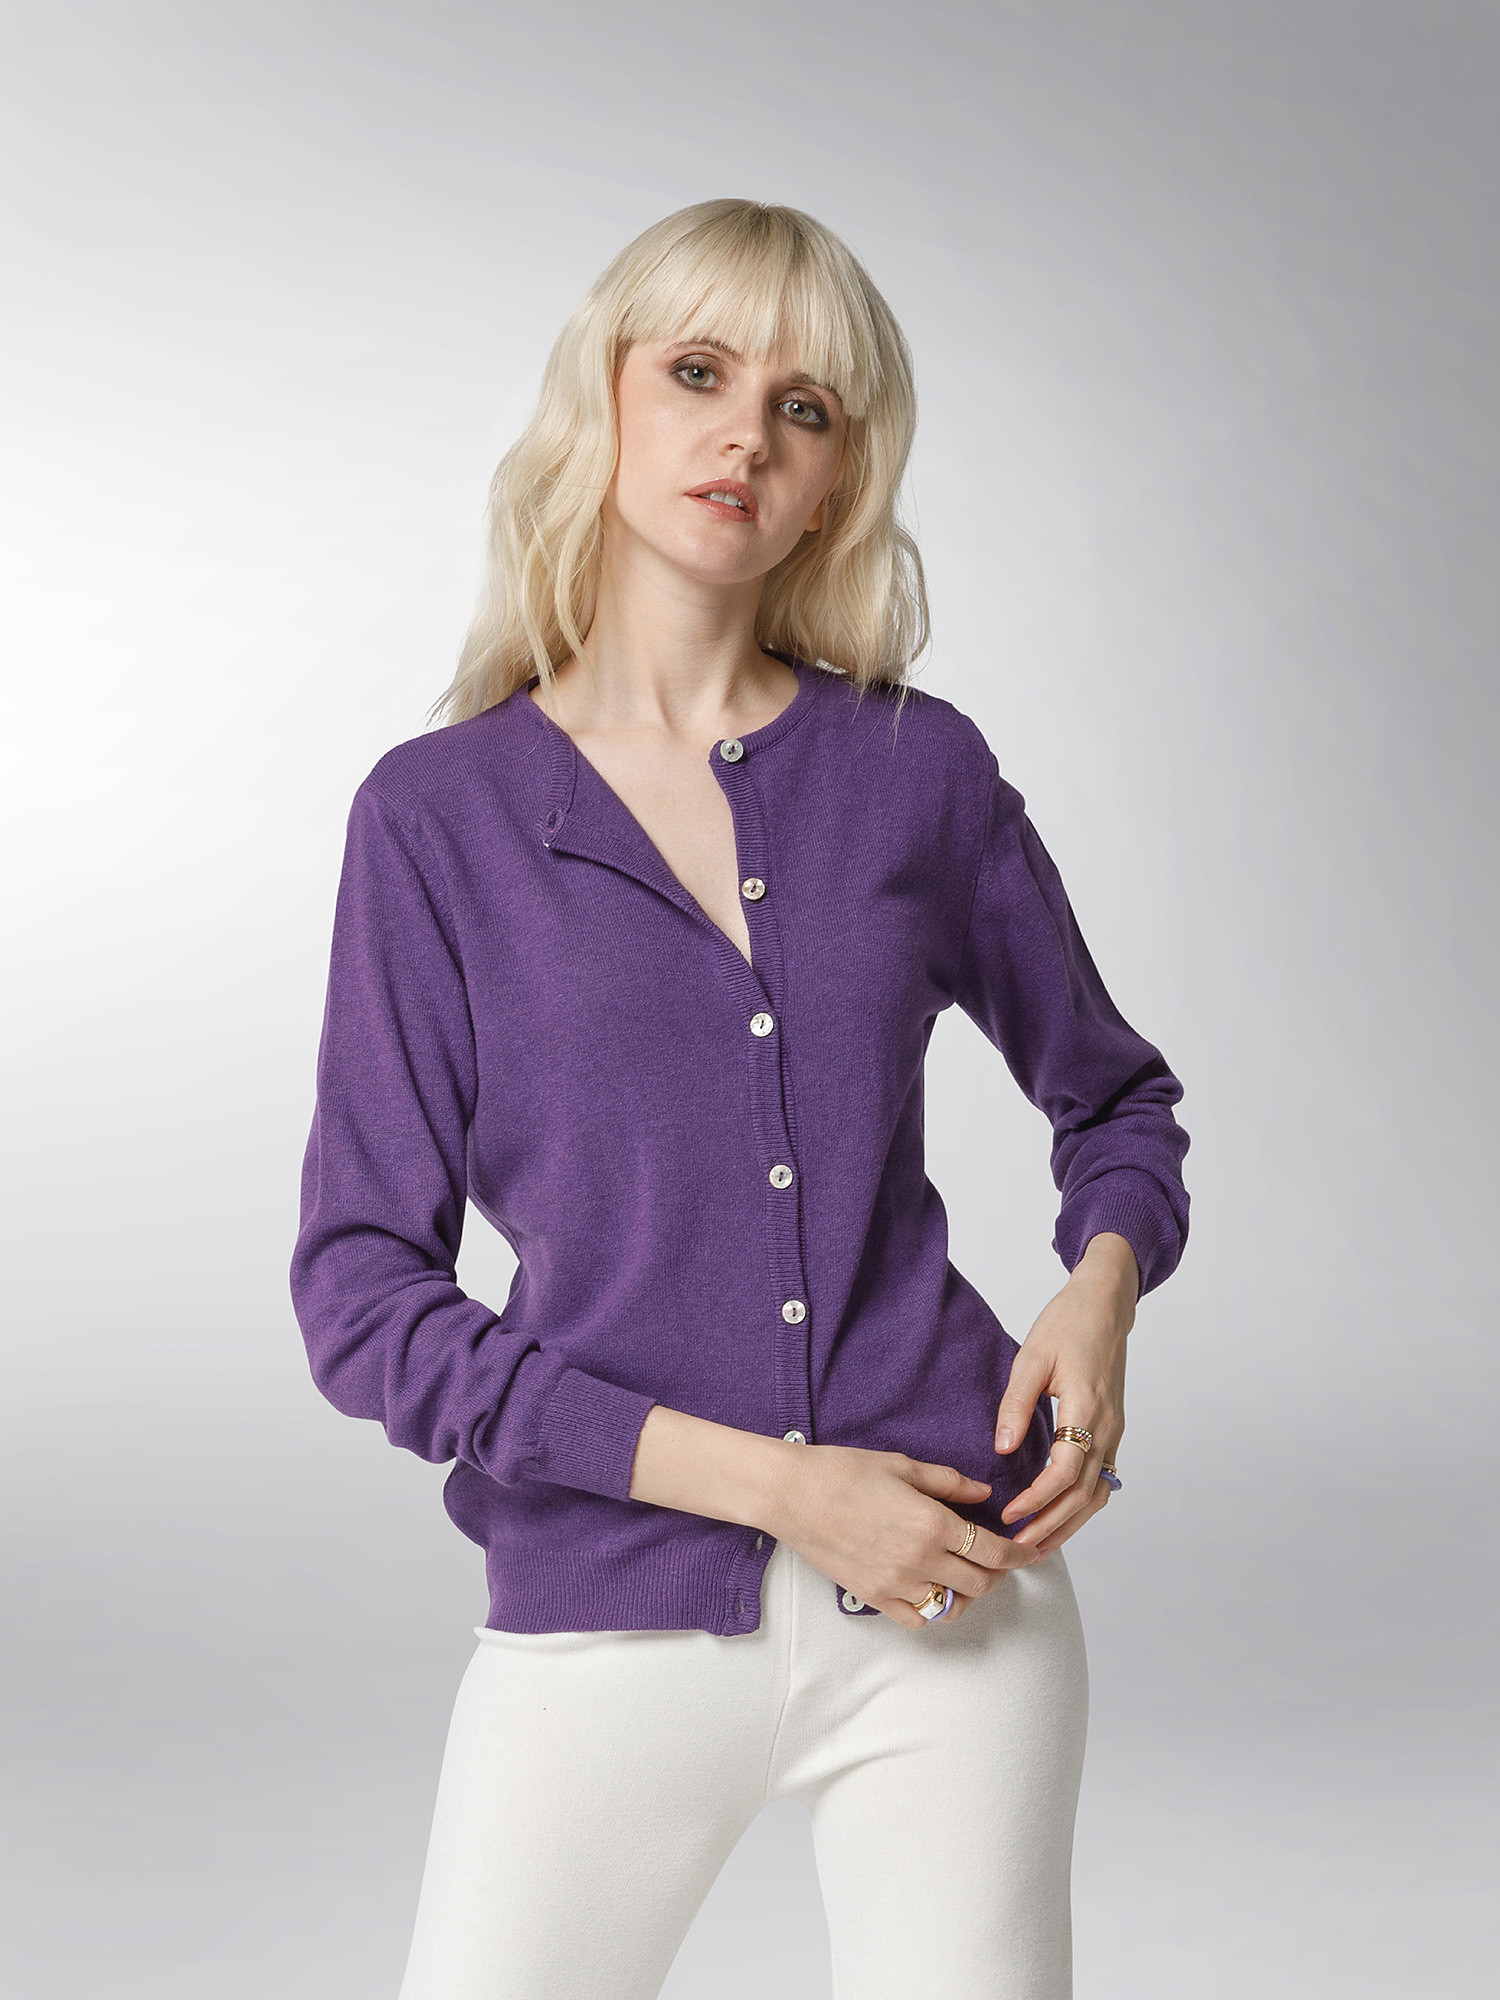 K Collection - Cardigan, Purple, large image number 3